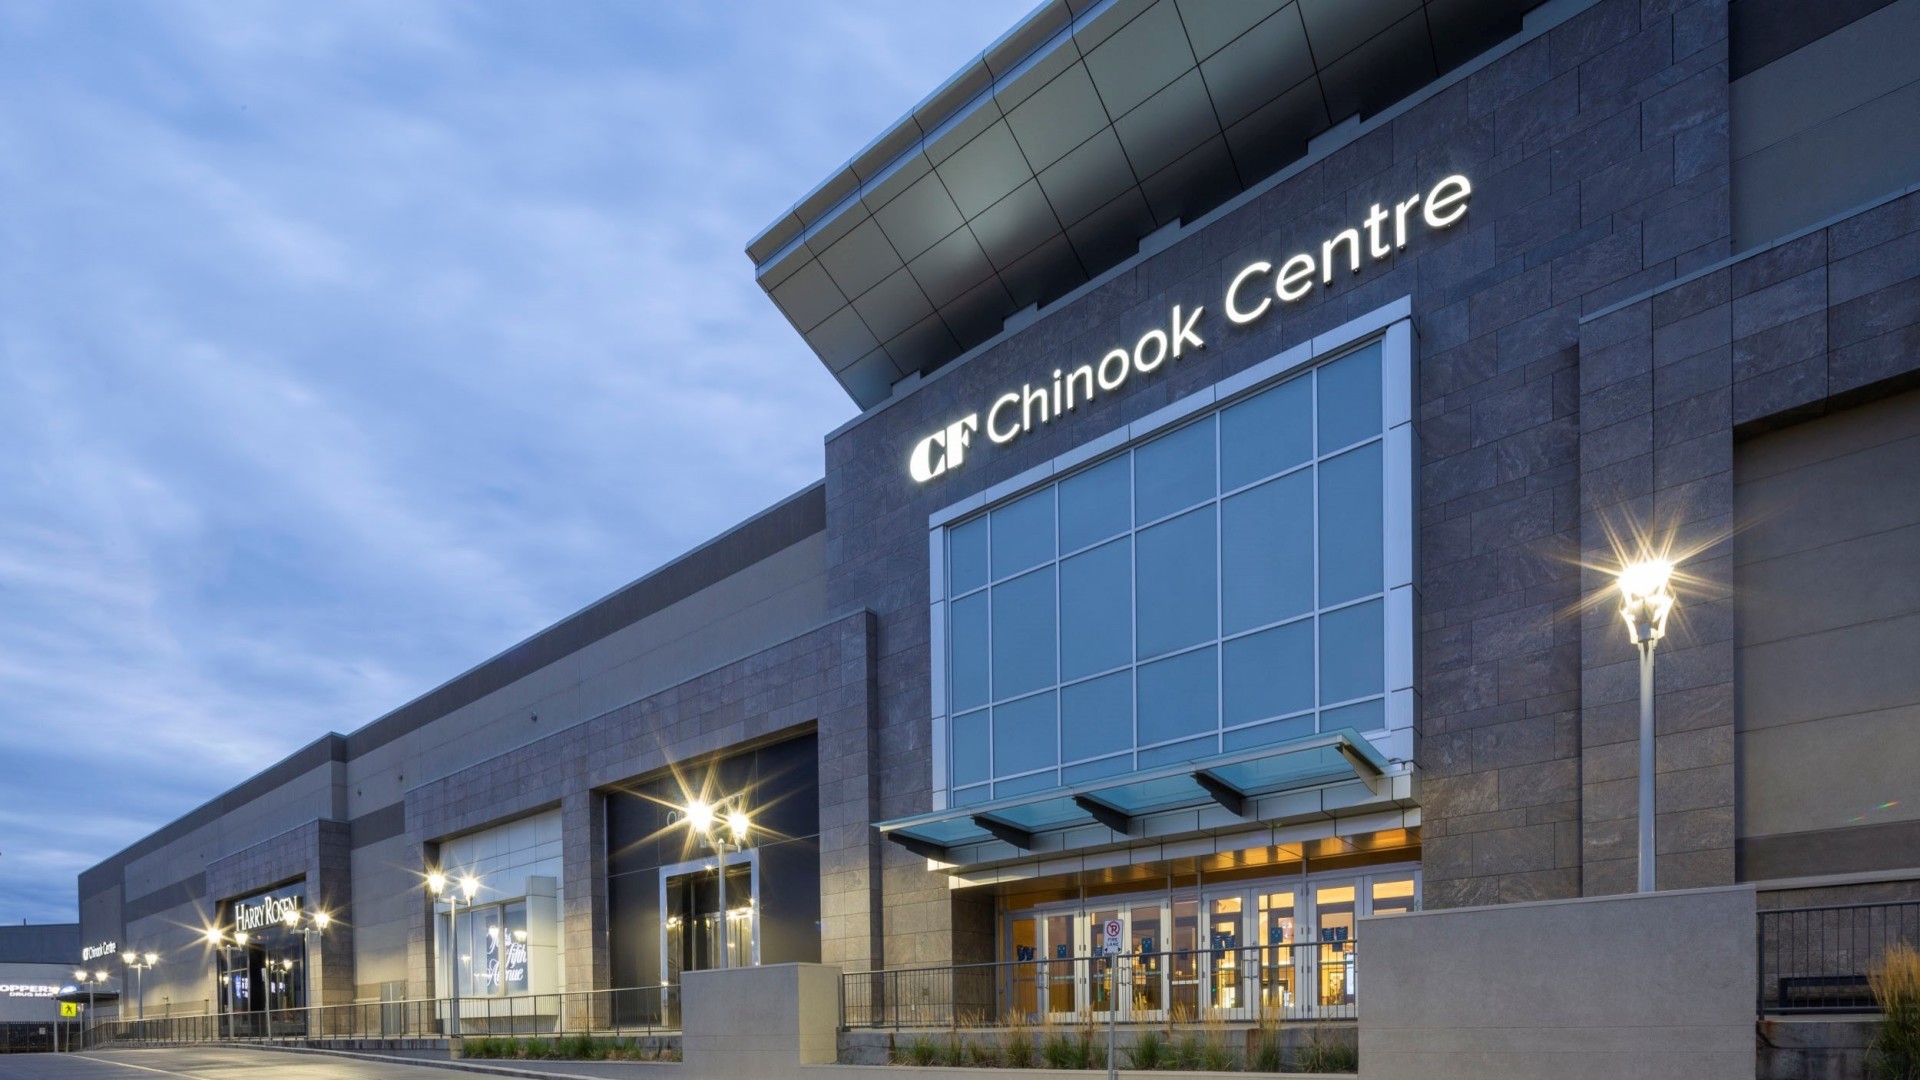 Calgary's CF Chinook Centre Adds Luxury Retailers to Location